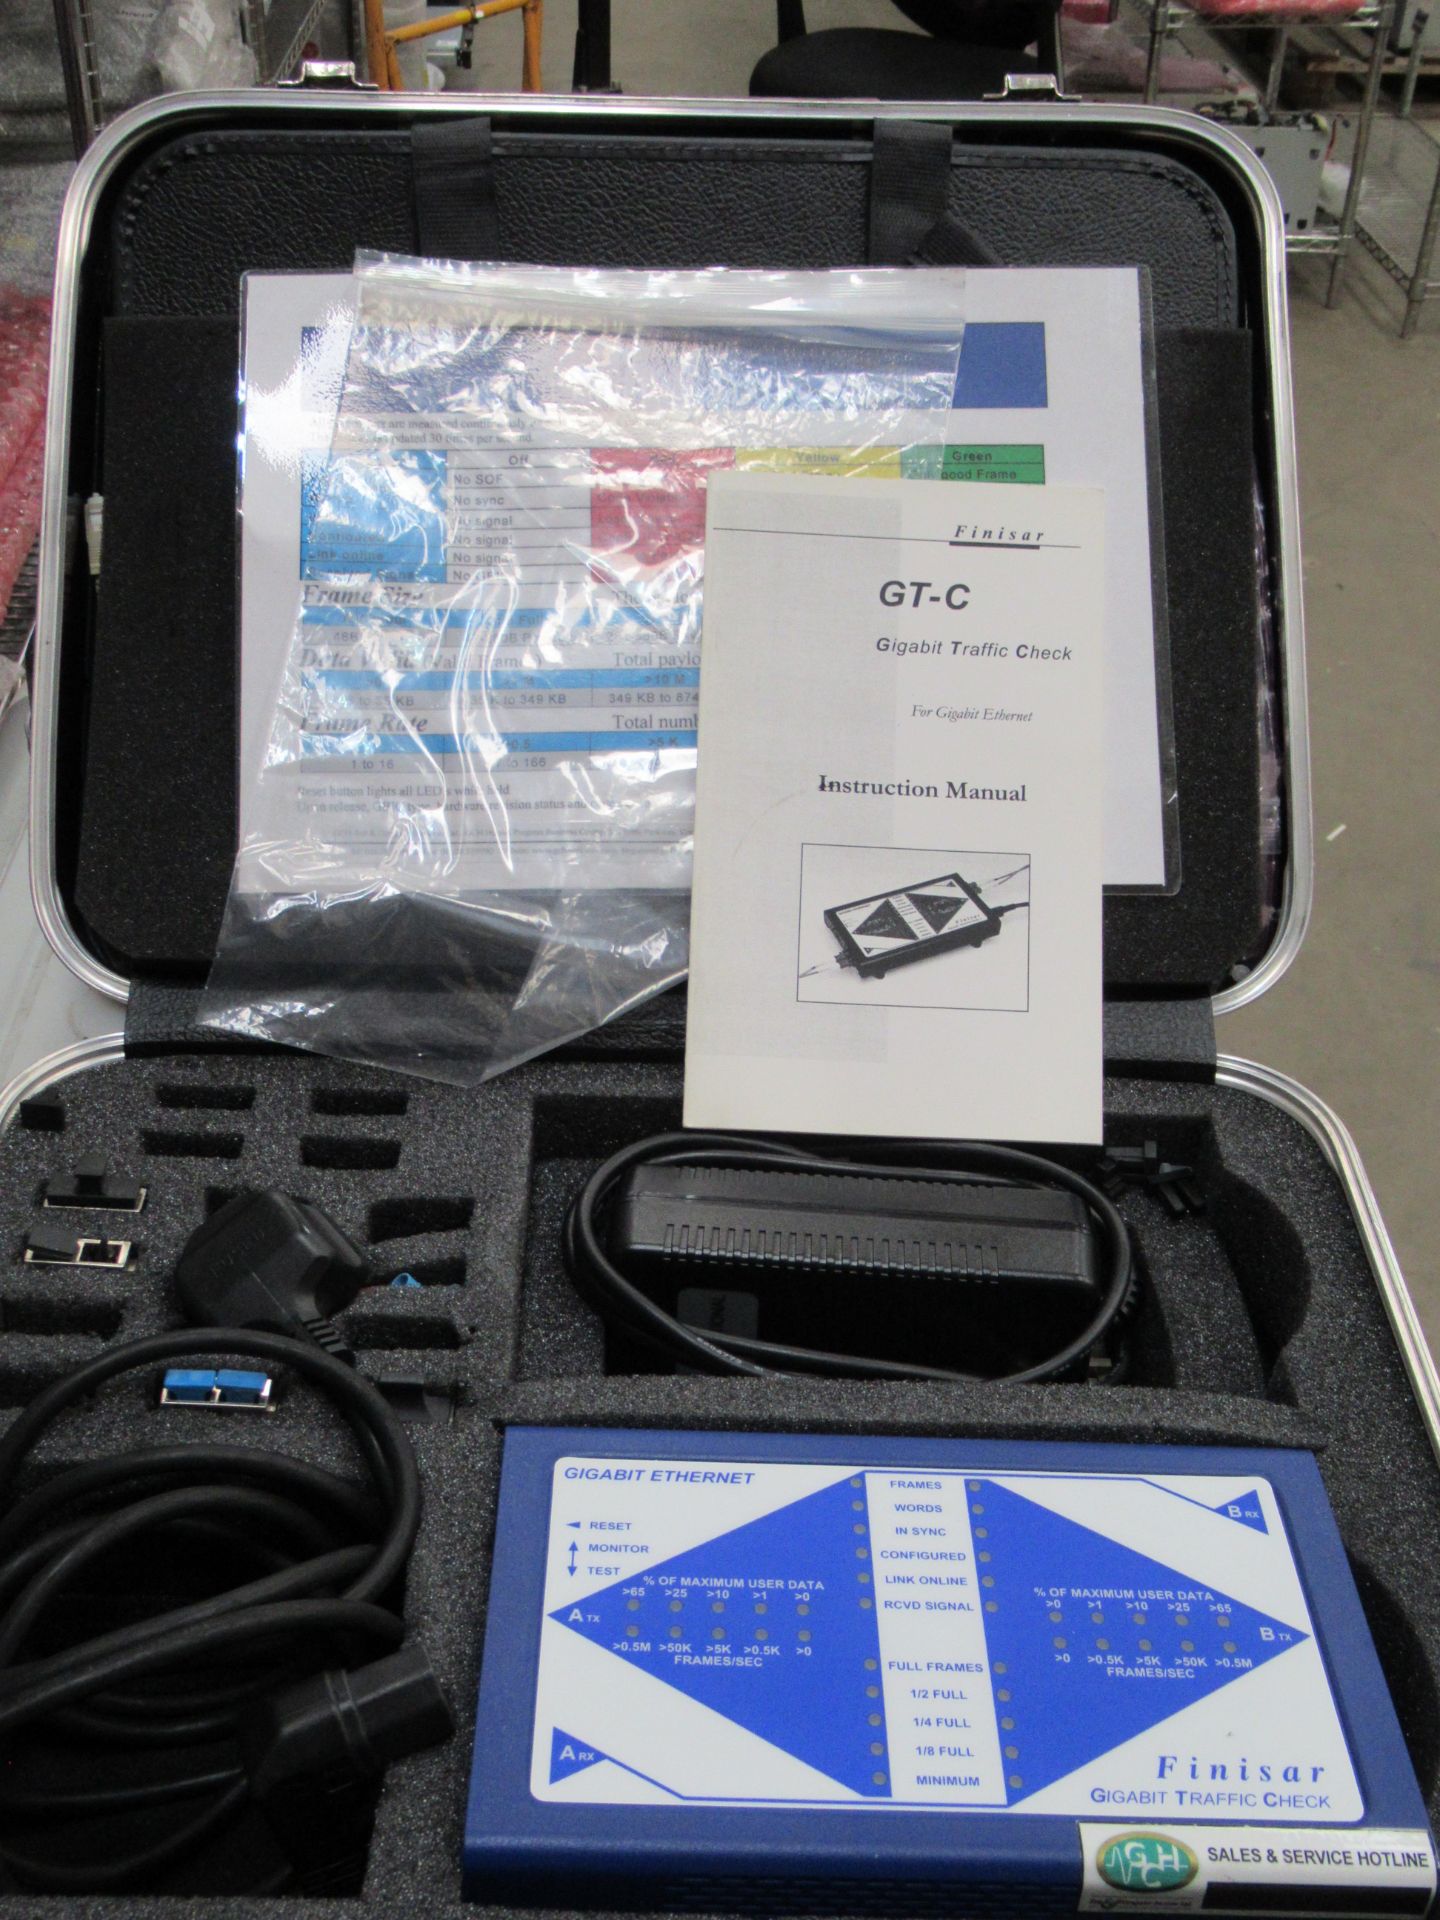 2 x Finisar Gigabit Trafic Tester in Cases and 1 x Finisar Fibre Channel Traffic Tester, Contents of - Image 5 of 48